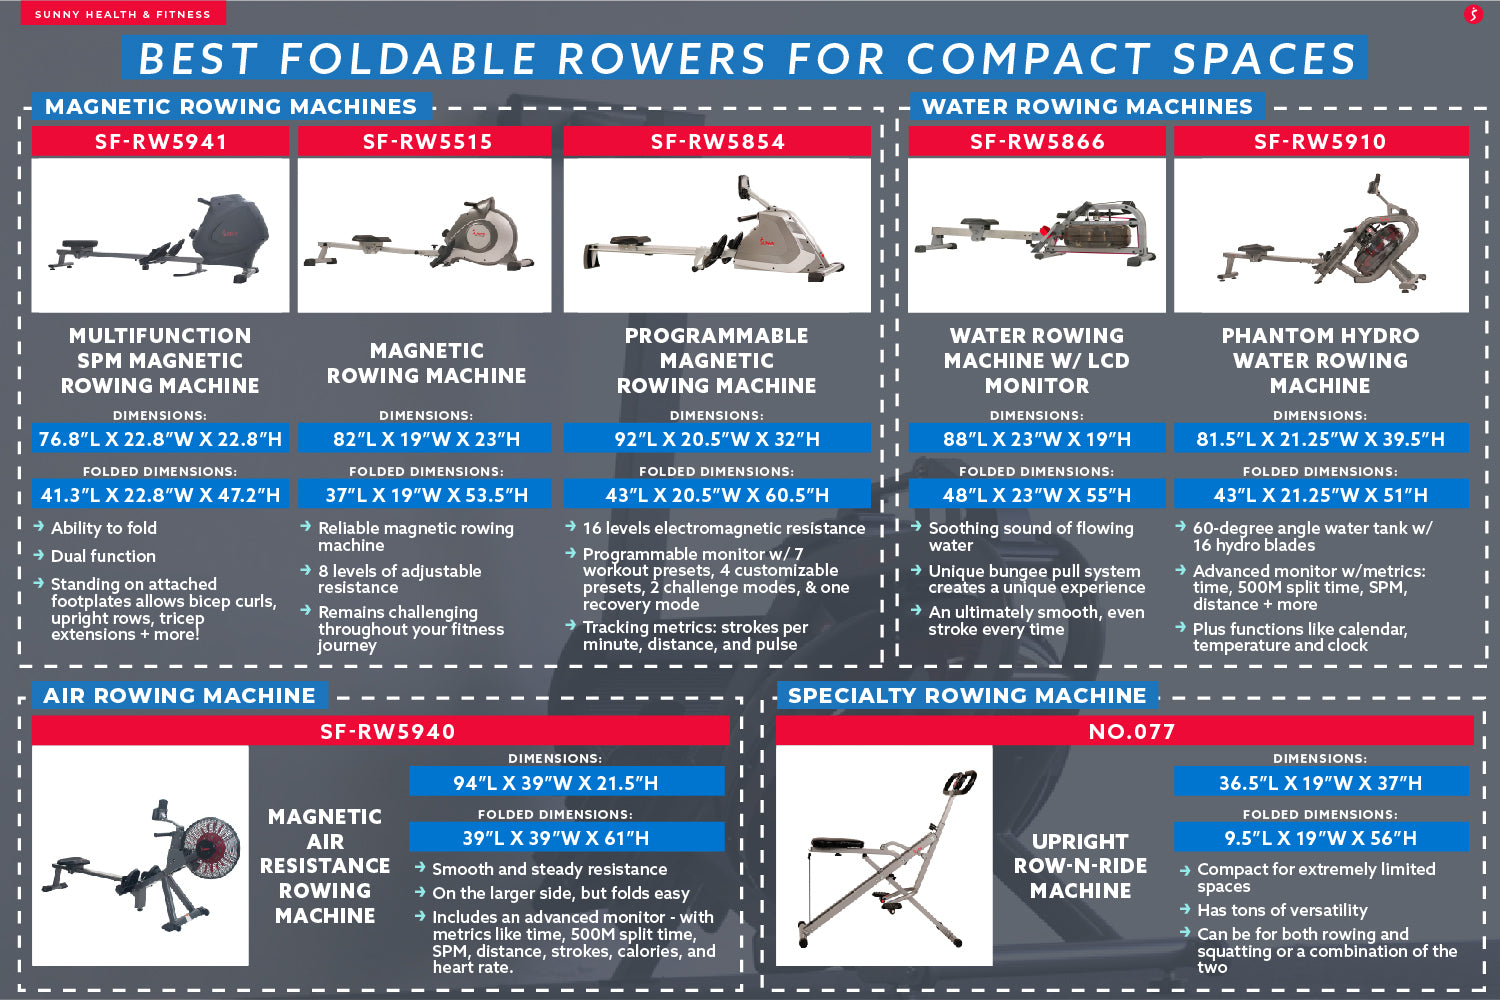 Best Foldable Rowers for Compact Spaces Infographic